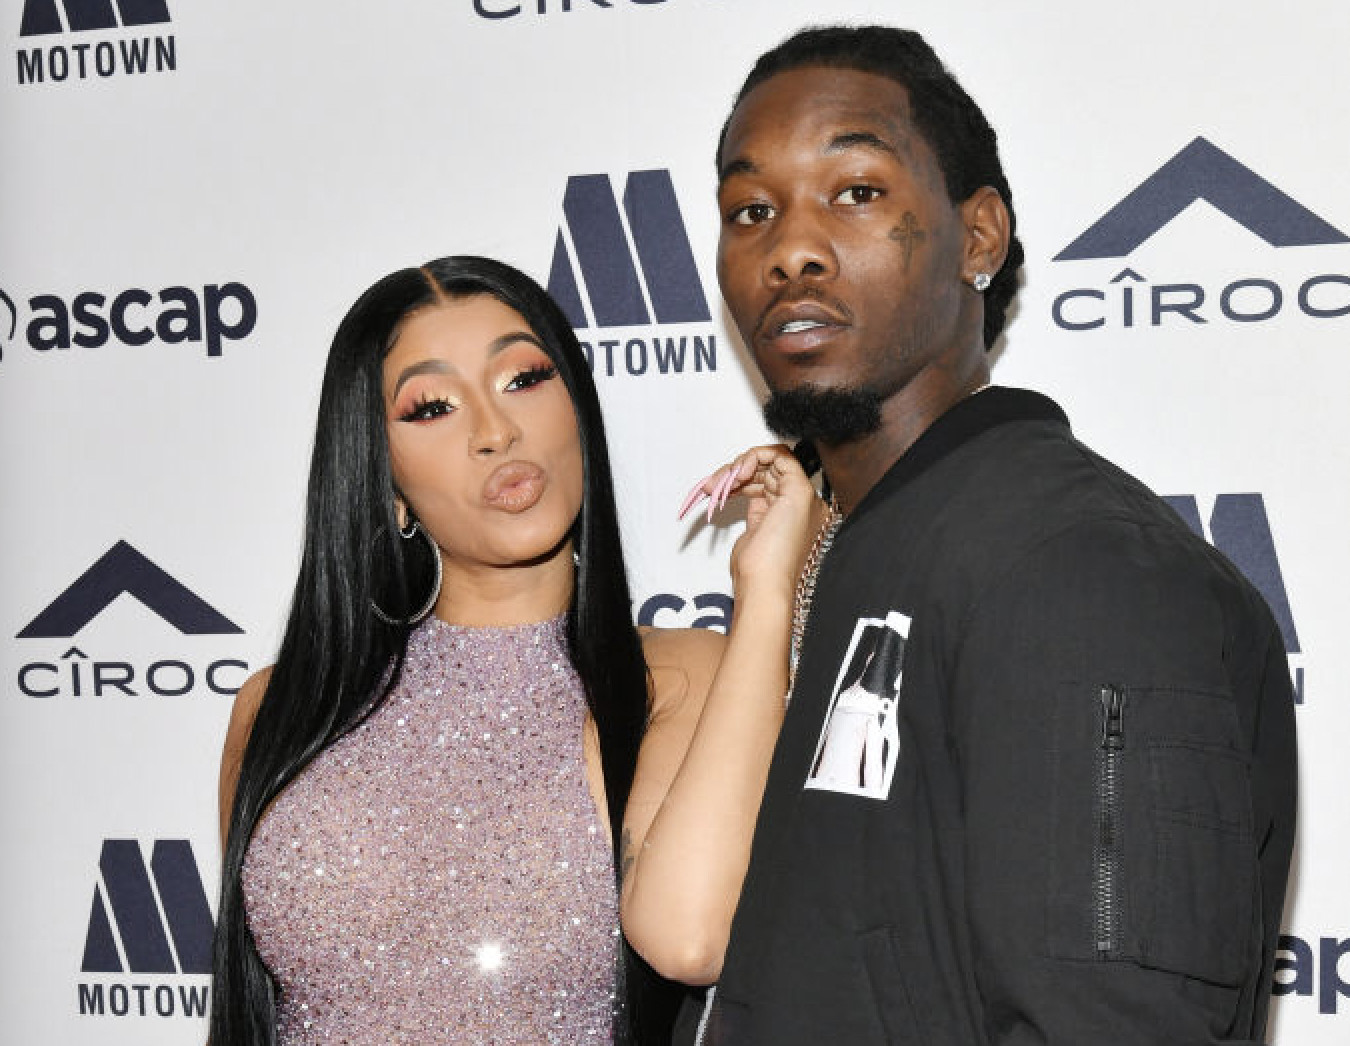 Cardi B’s Future Plans Include Joint Mixtape With Offset & A Spanish Album